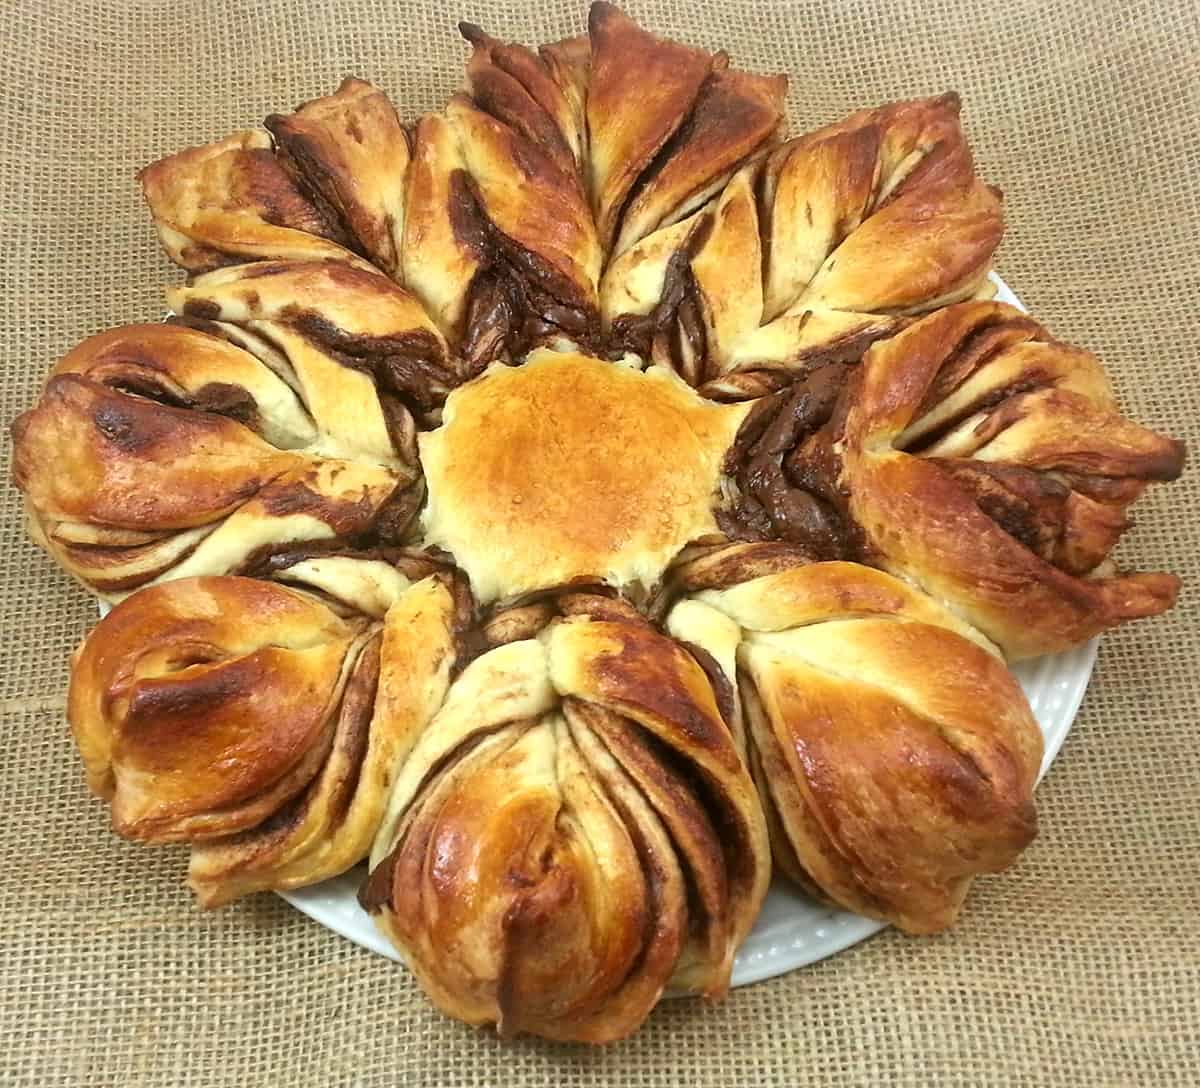 Best star bread recipe with Nutella (Easy holiday braided bread). 